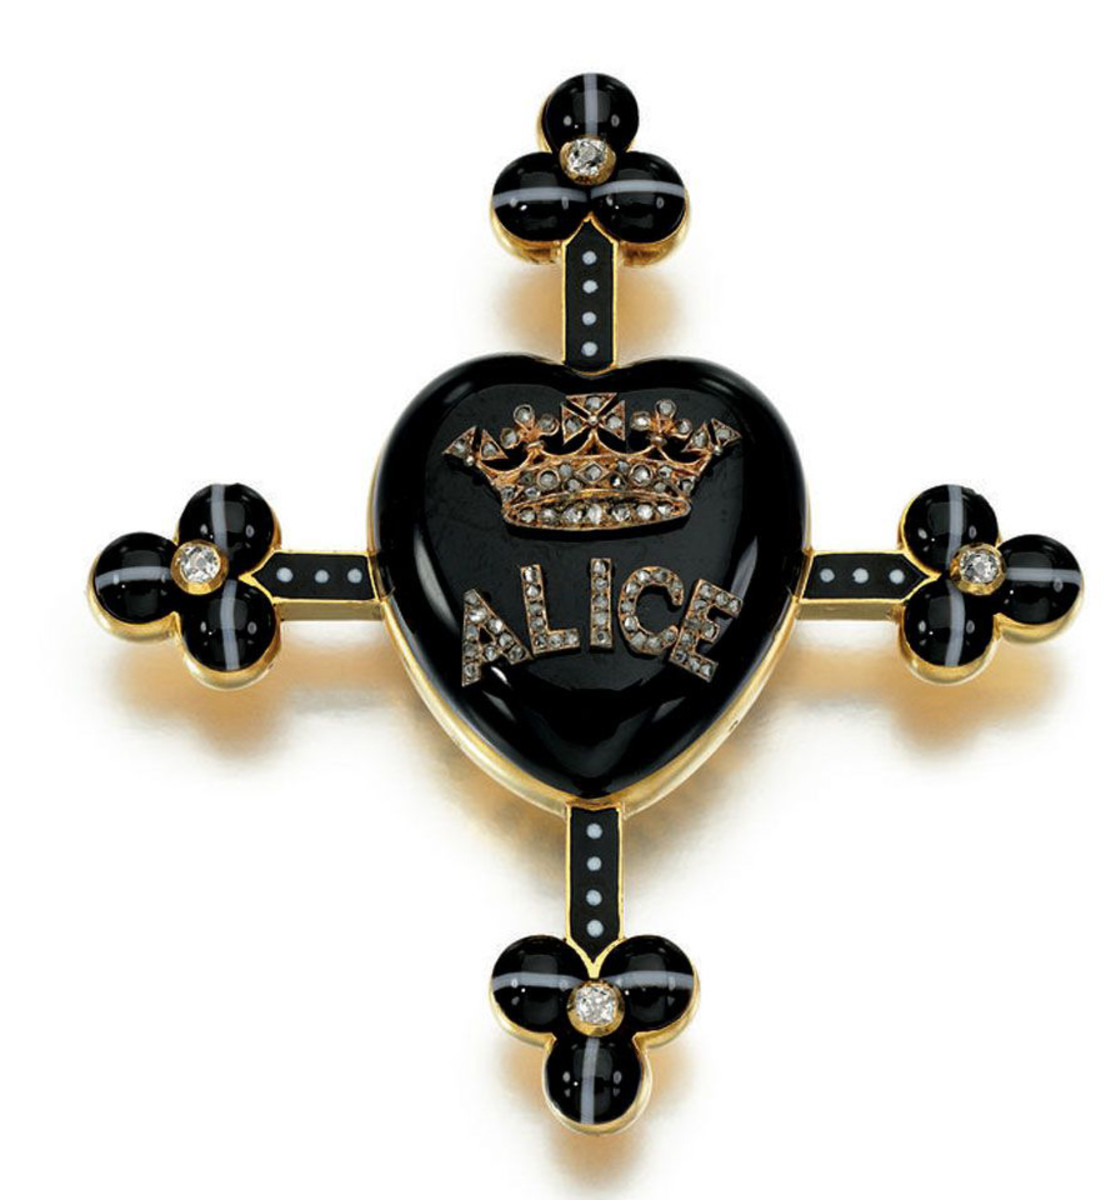 One of Queen Victoria’s mourning pieces honoring her daughter, Alice: onyx, banded agate, enamel and diamond pendant circa 1878, centering on an onyx heart with Alice beneath a coronet, and a glazed compartment containing a lock of hair, shown below. This sold at auction for $34,821.